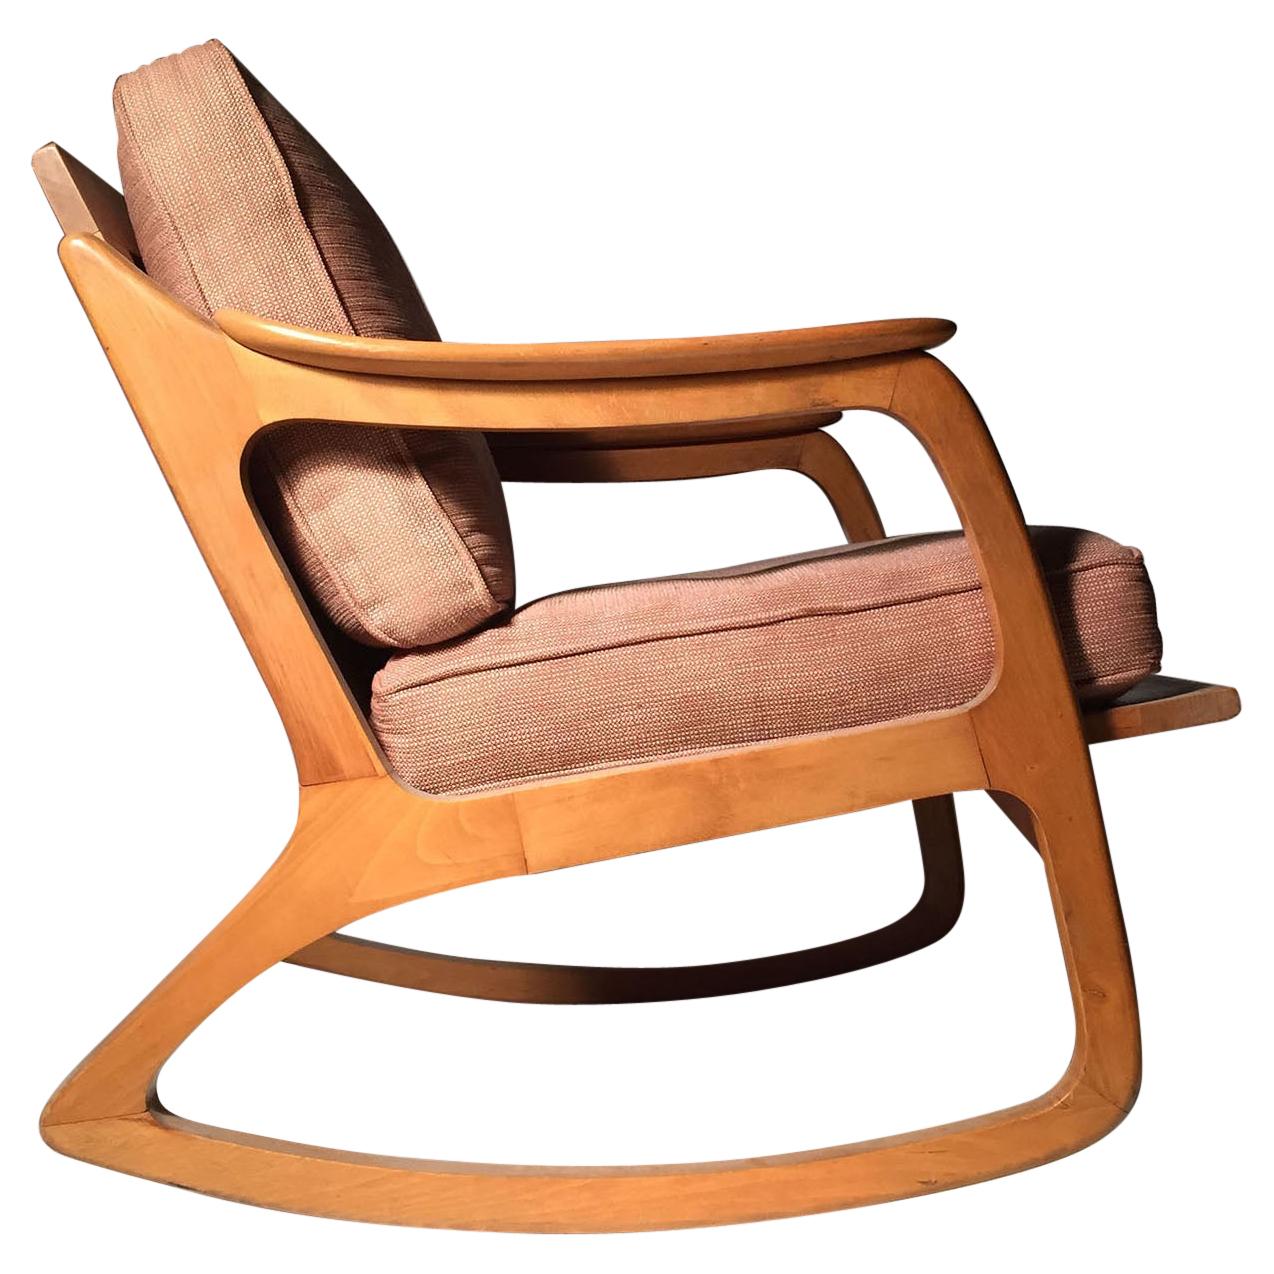 Lawrence Peabody Rocking Chair